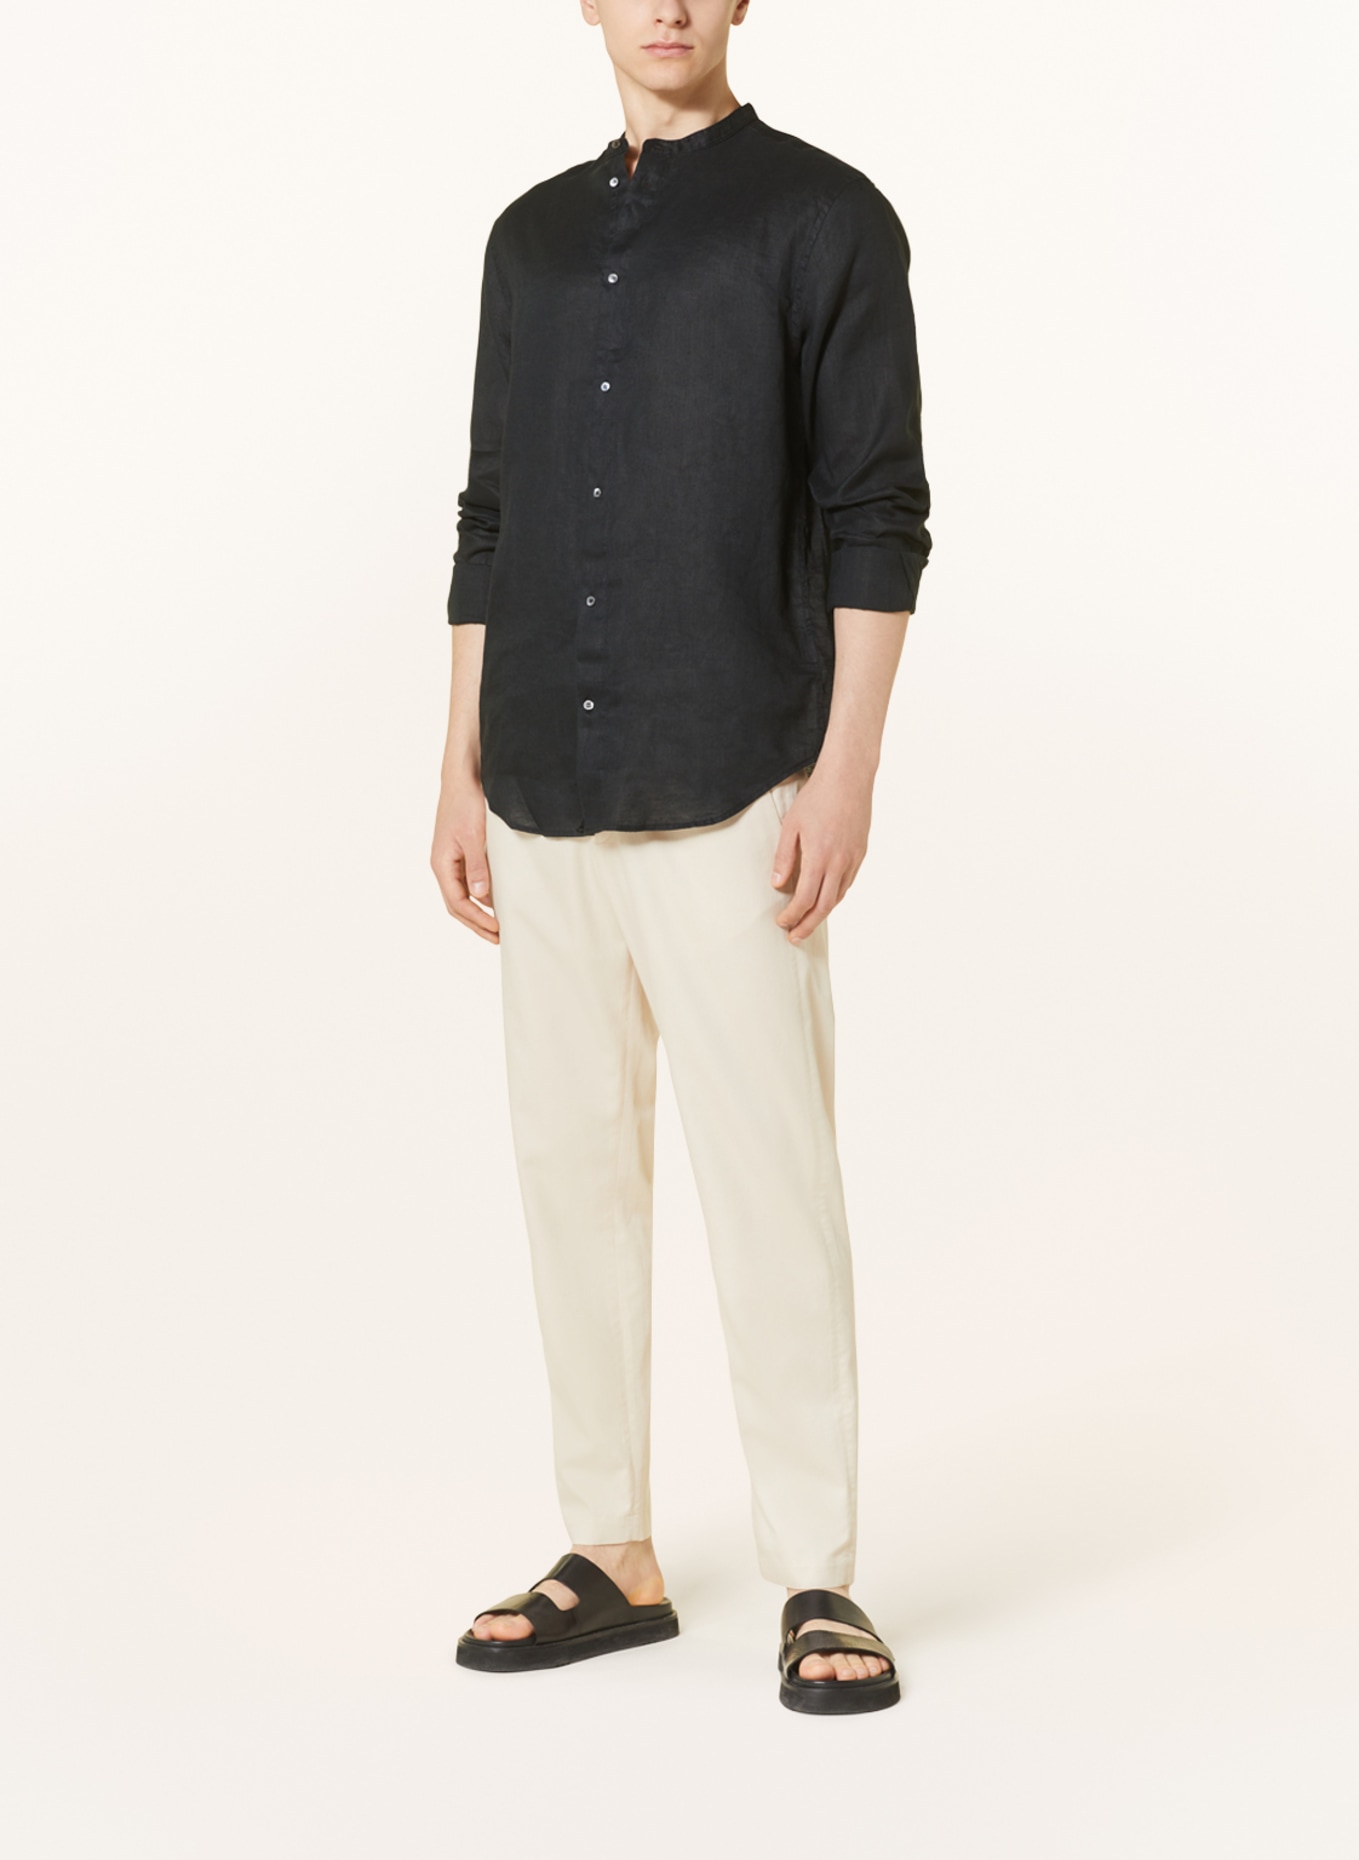 COS Shirt regular fit with stand-up collar, Color: BLACK (Image 2)